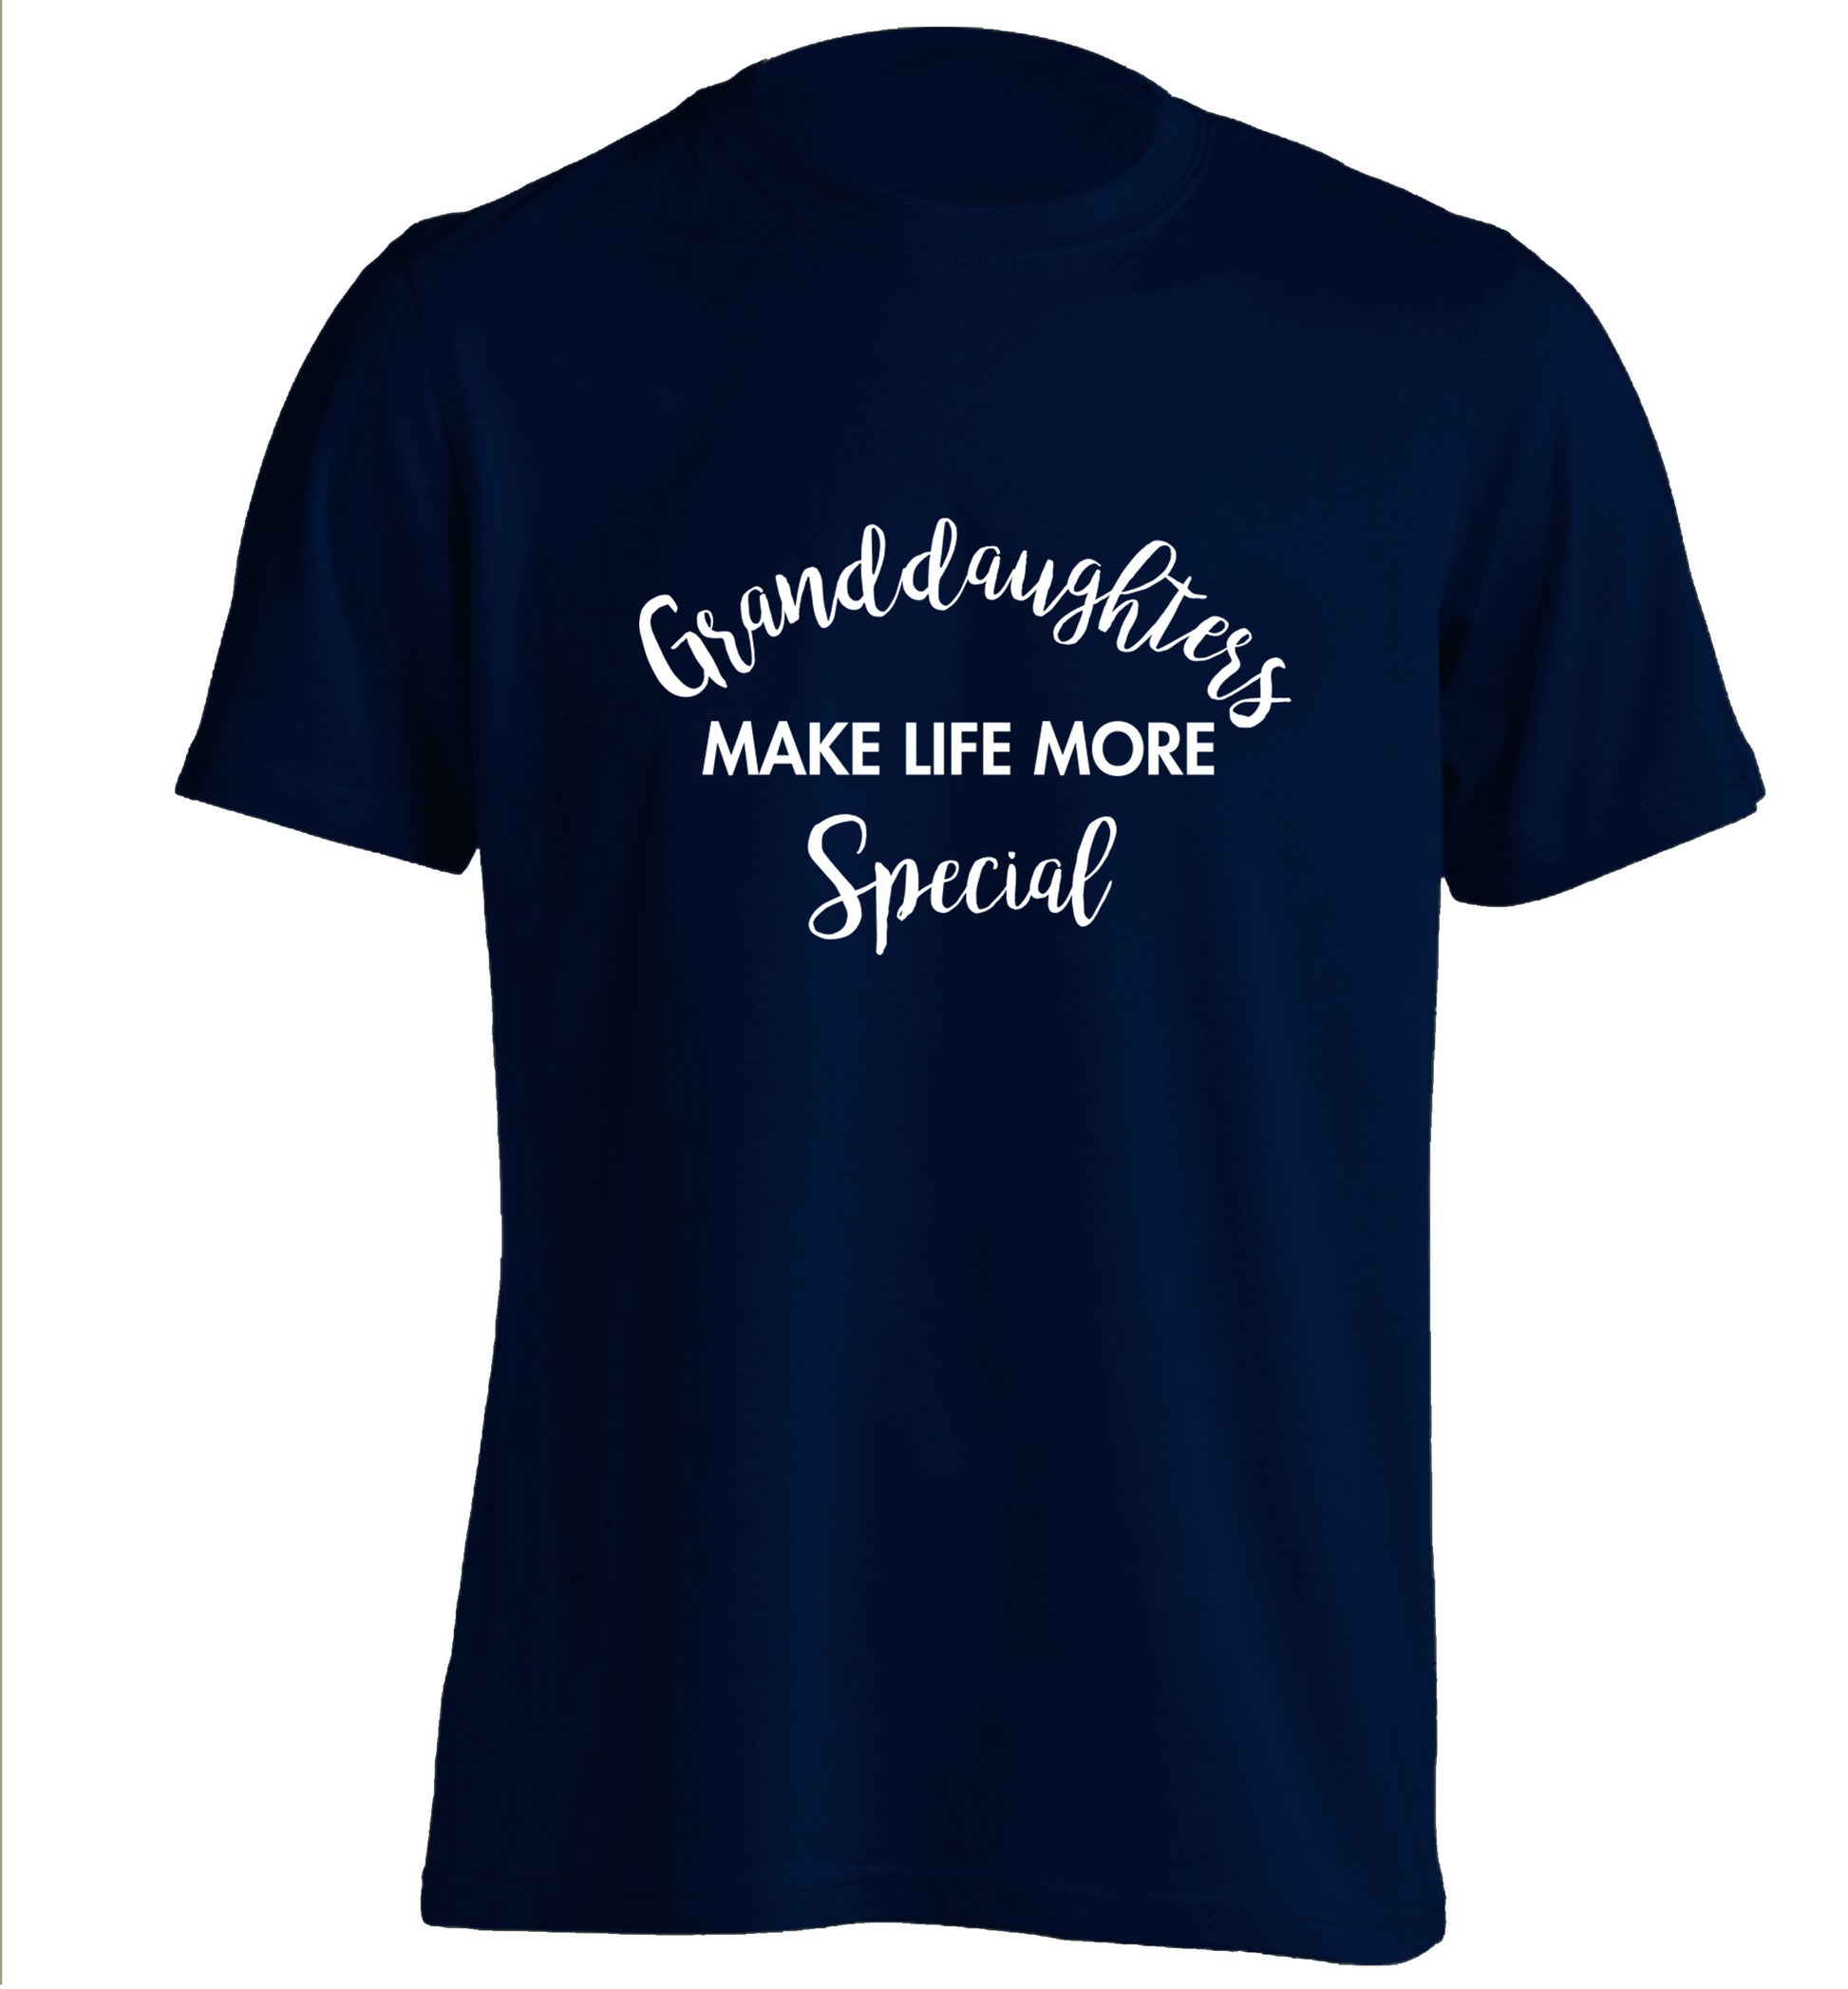 Granddaughters make life more special adults unisex navy Tshirt 2XL